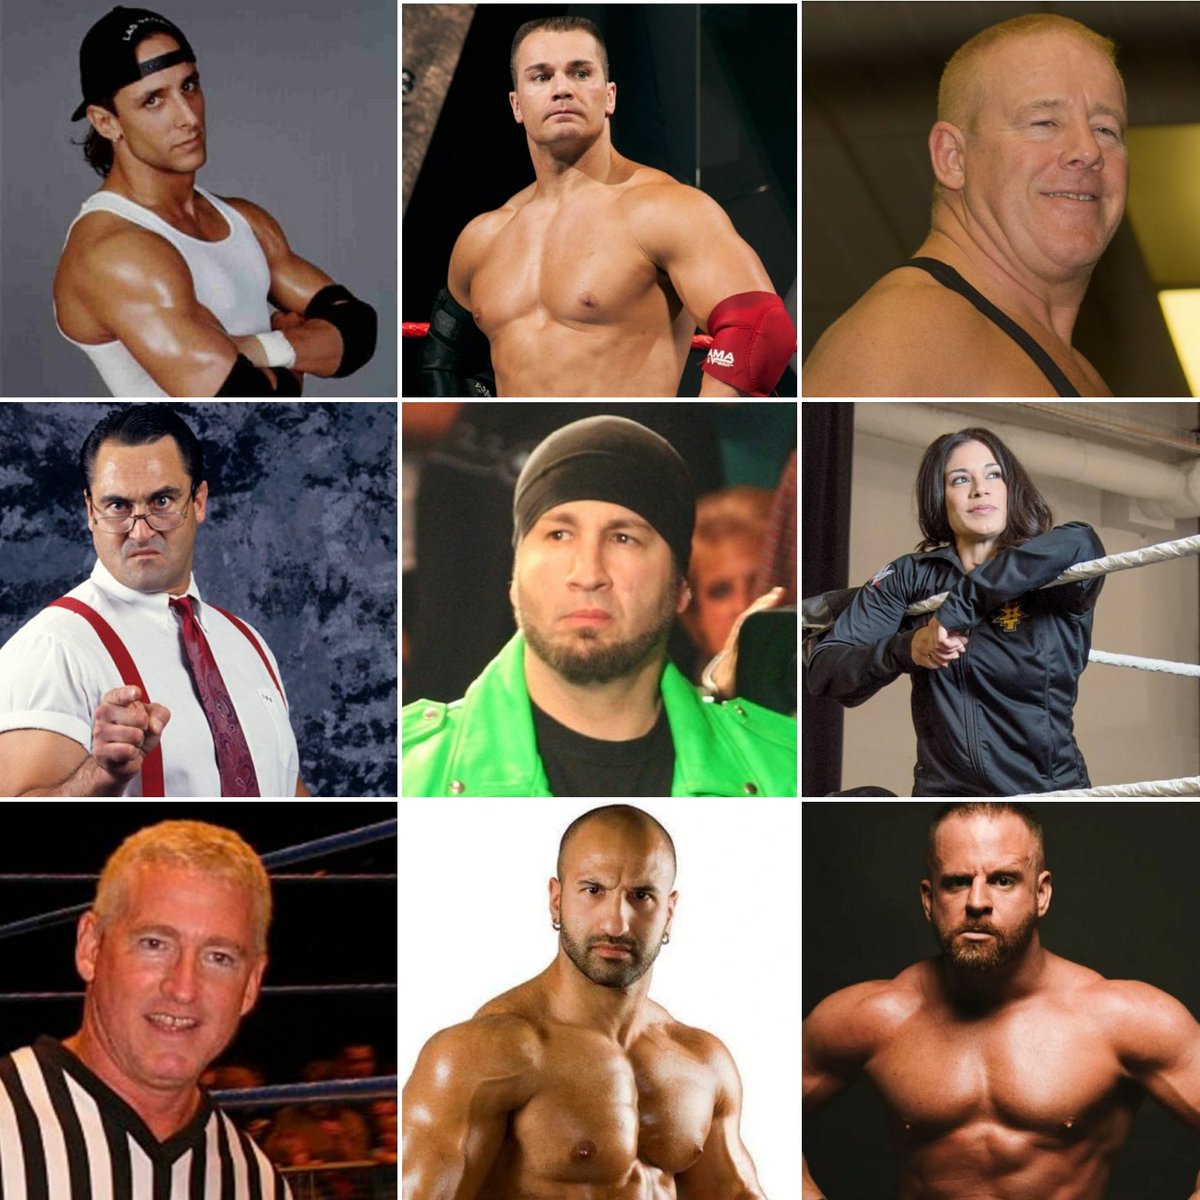 Another 9 talents released.Trainers and producers:Lance StormBilly KidmanShane Hurricane HelmsDave Fit FinlayScott ArmstrongSarah StockShawn DaivariMike IRS RotundaPat Buck